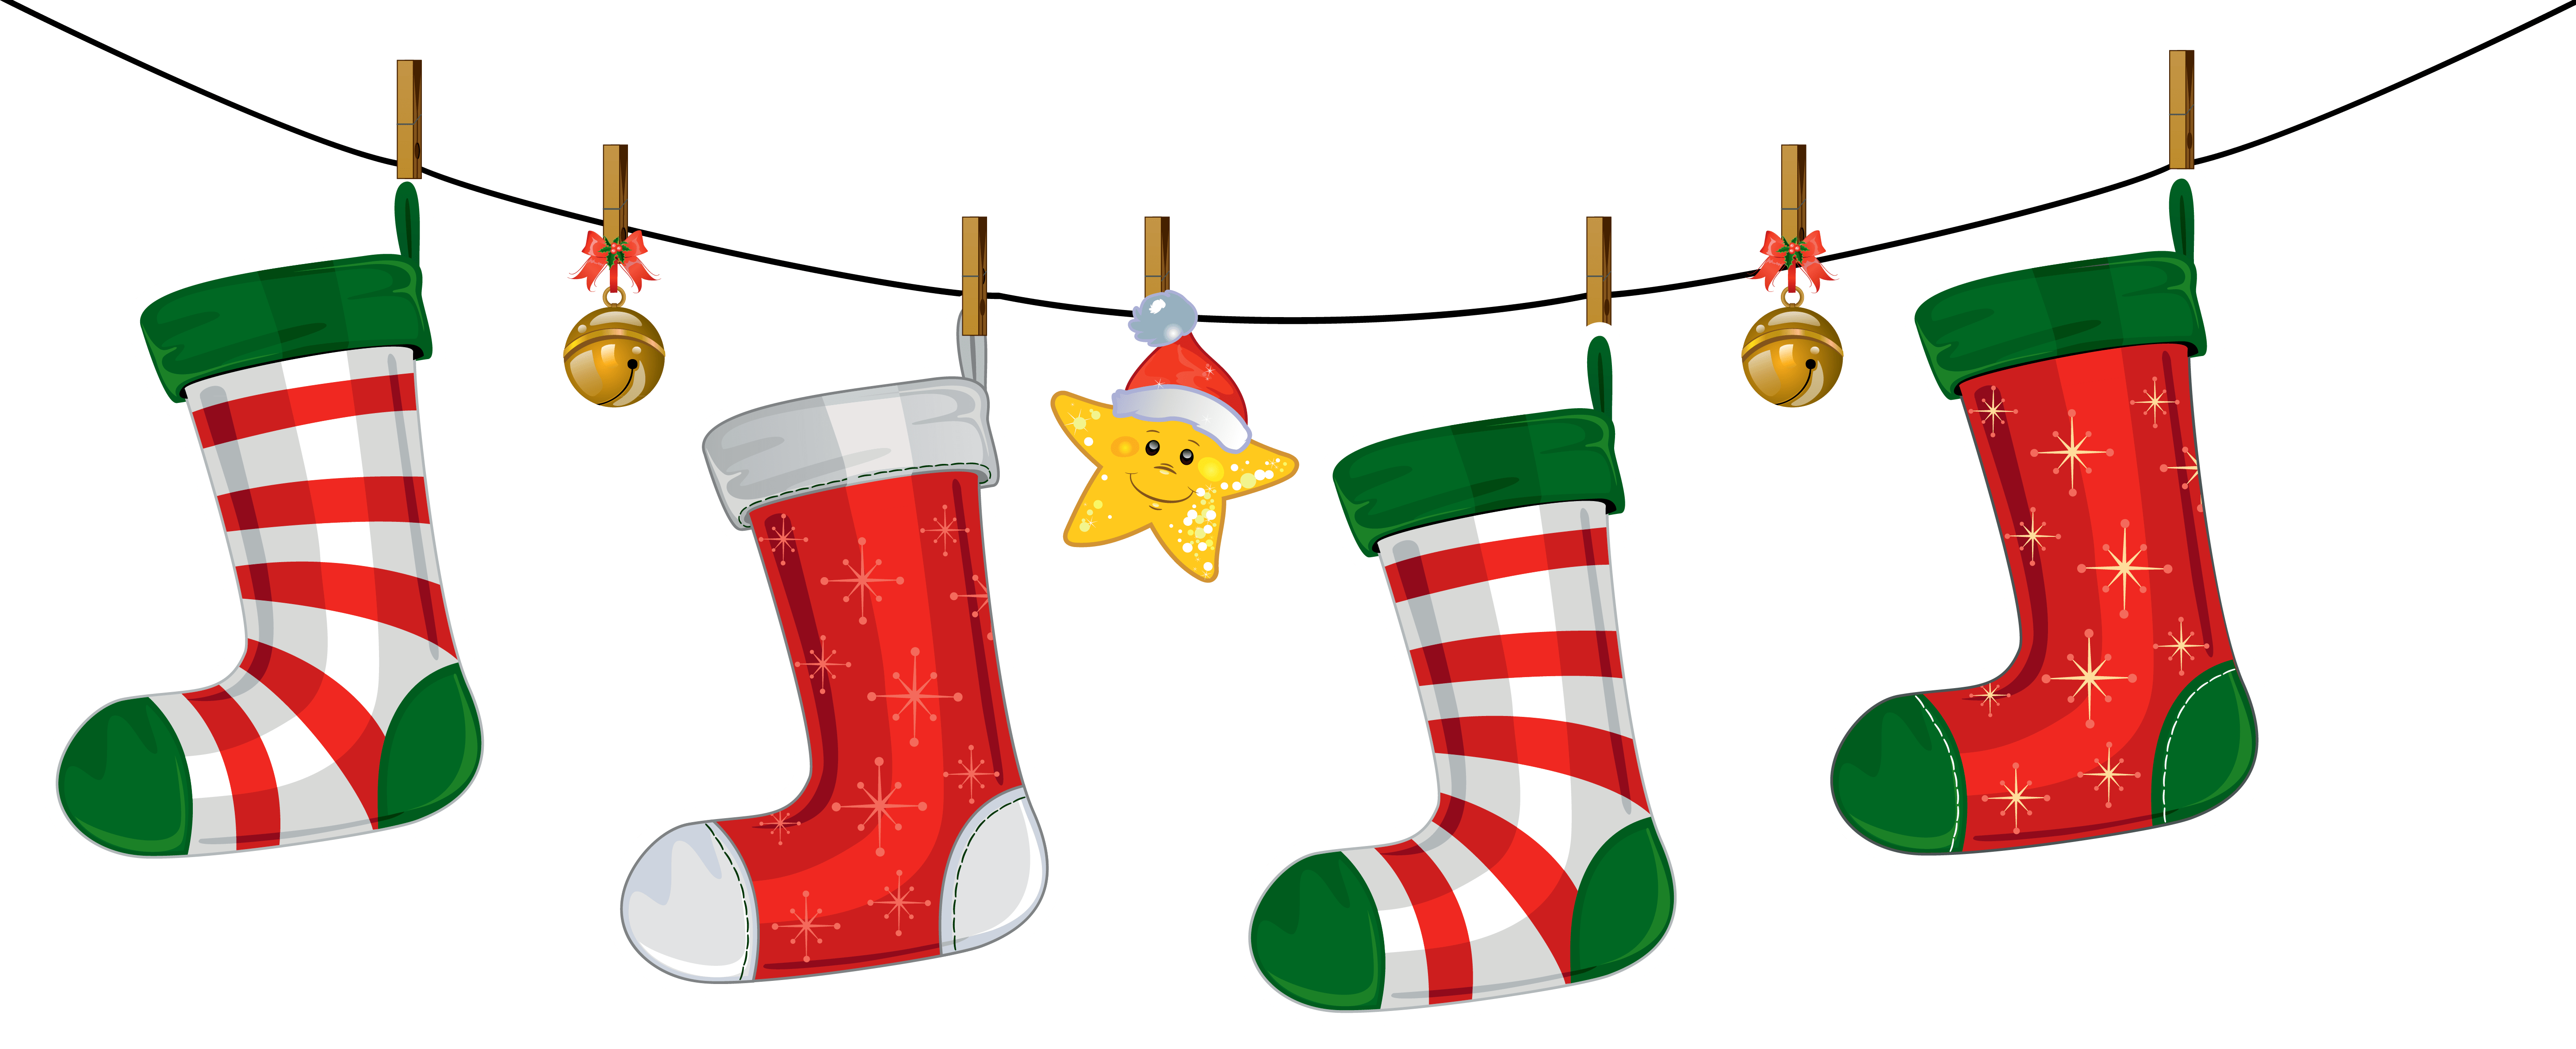 Free Clipart Christmas Stocking at GetDrawings.com.